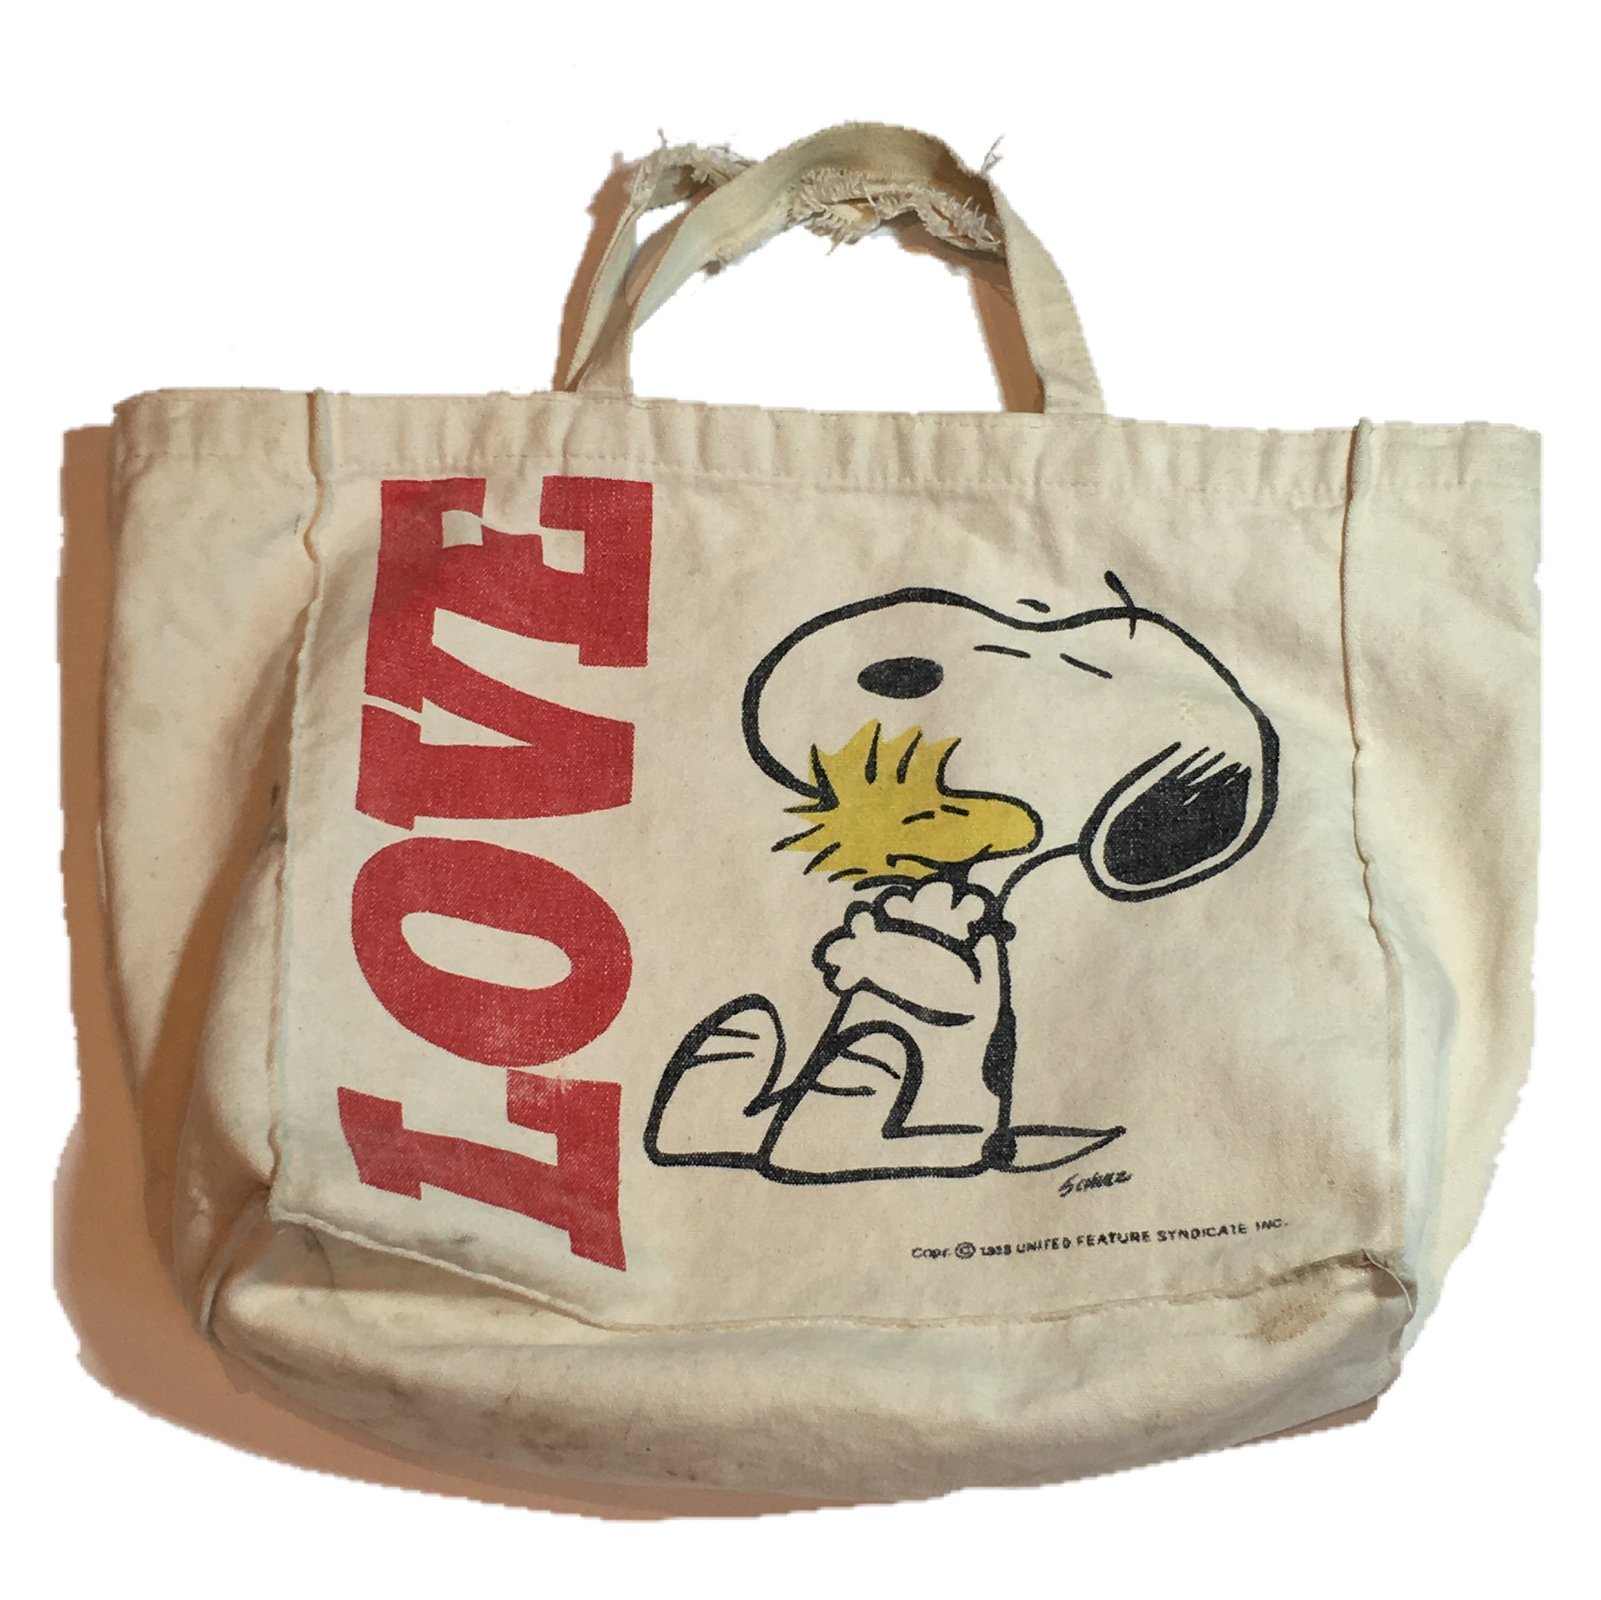 Image of Love snoopy tote bag